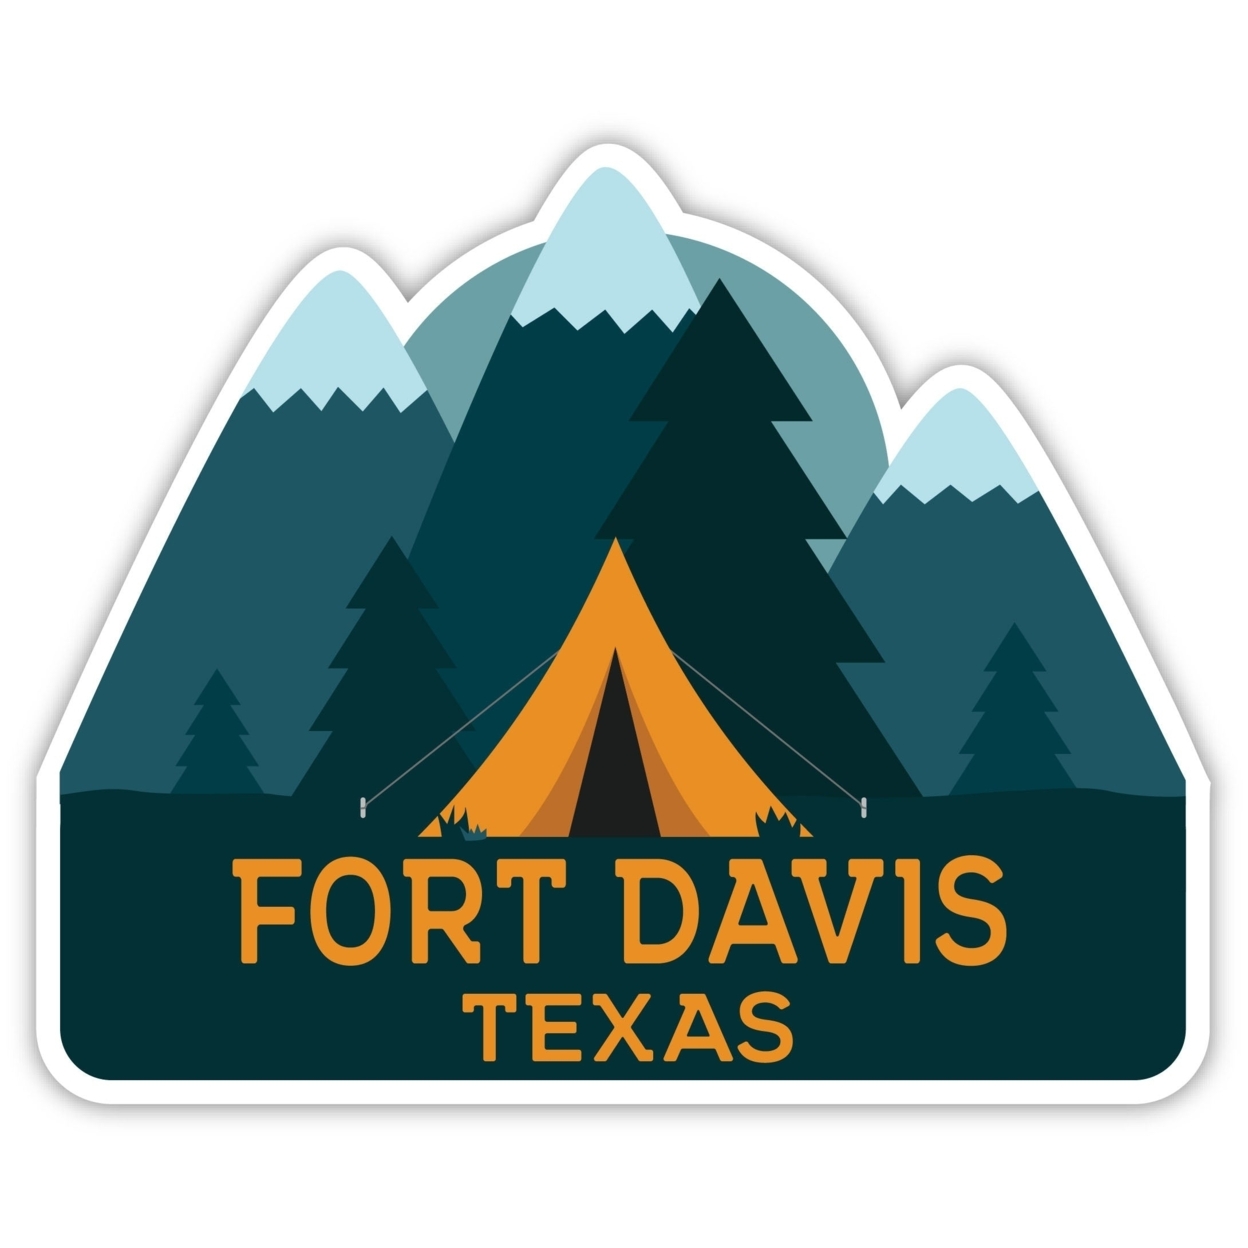 Fort Davis Texas Souvenir Decorative Stickers (Choose Theme And Size) - 4-Pack, 10-Inch, Tent